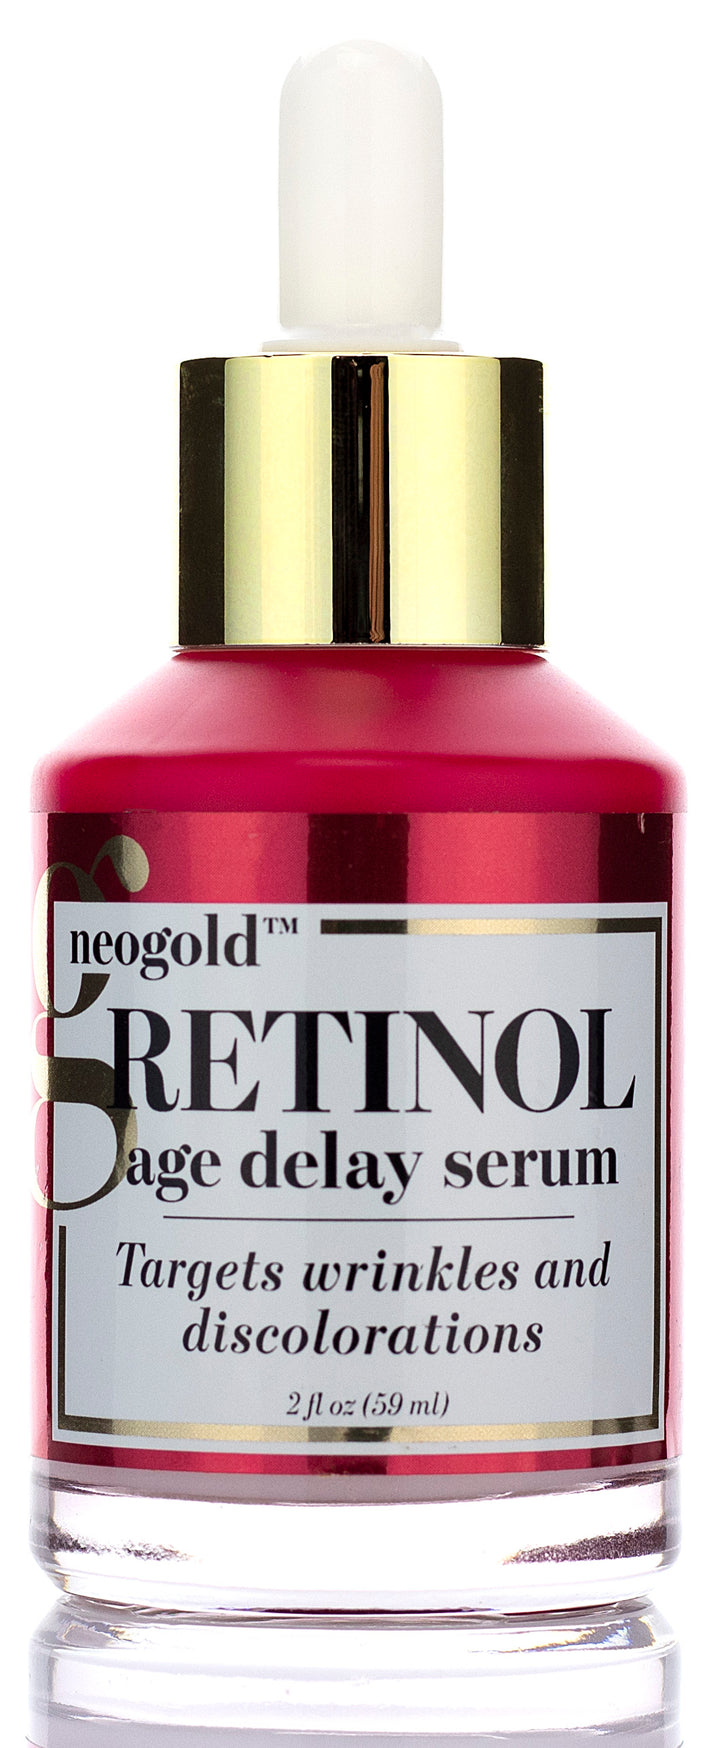 Neogold Retinol Age Delay Serum - Targets Wrinkles and Discolorations - Concentrated Retinol, Glycerin, Soothing Aloe Vera And Green Tea - Paraben Free - 2 Fl Oz - Pure Valley 